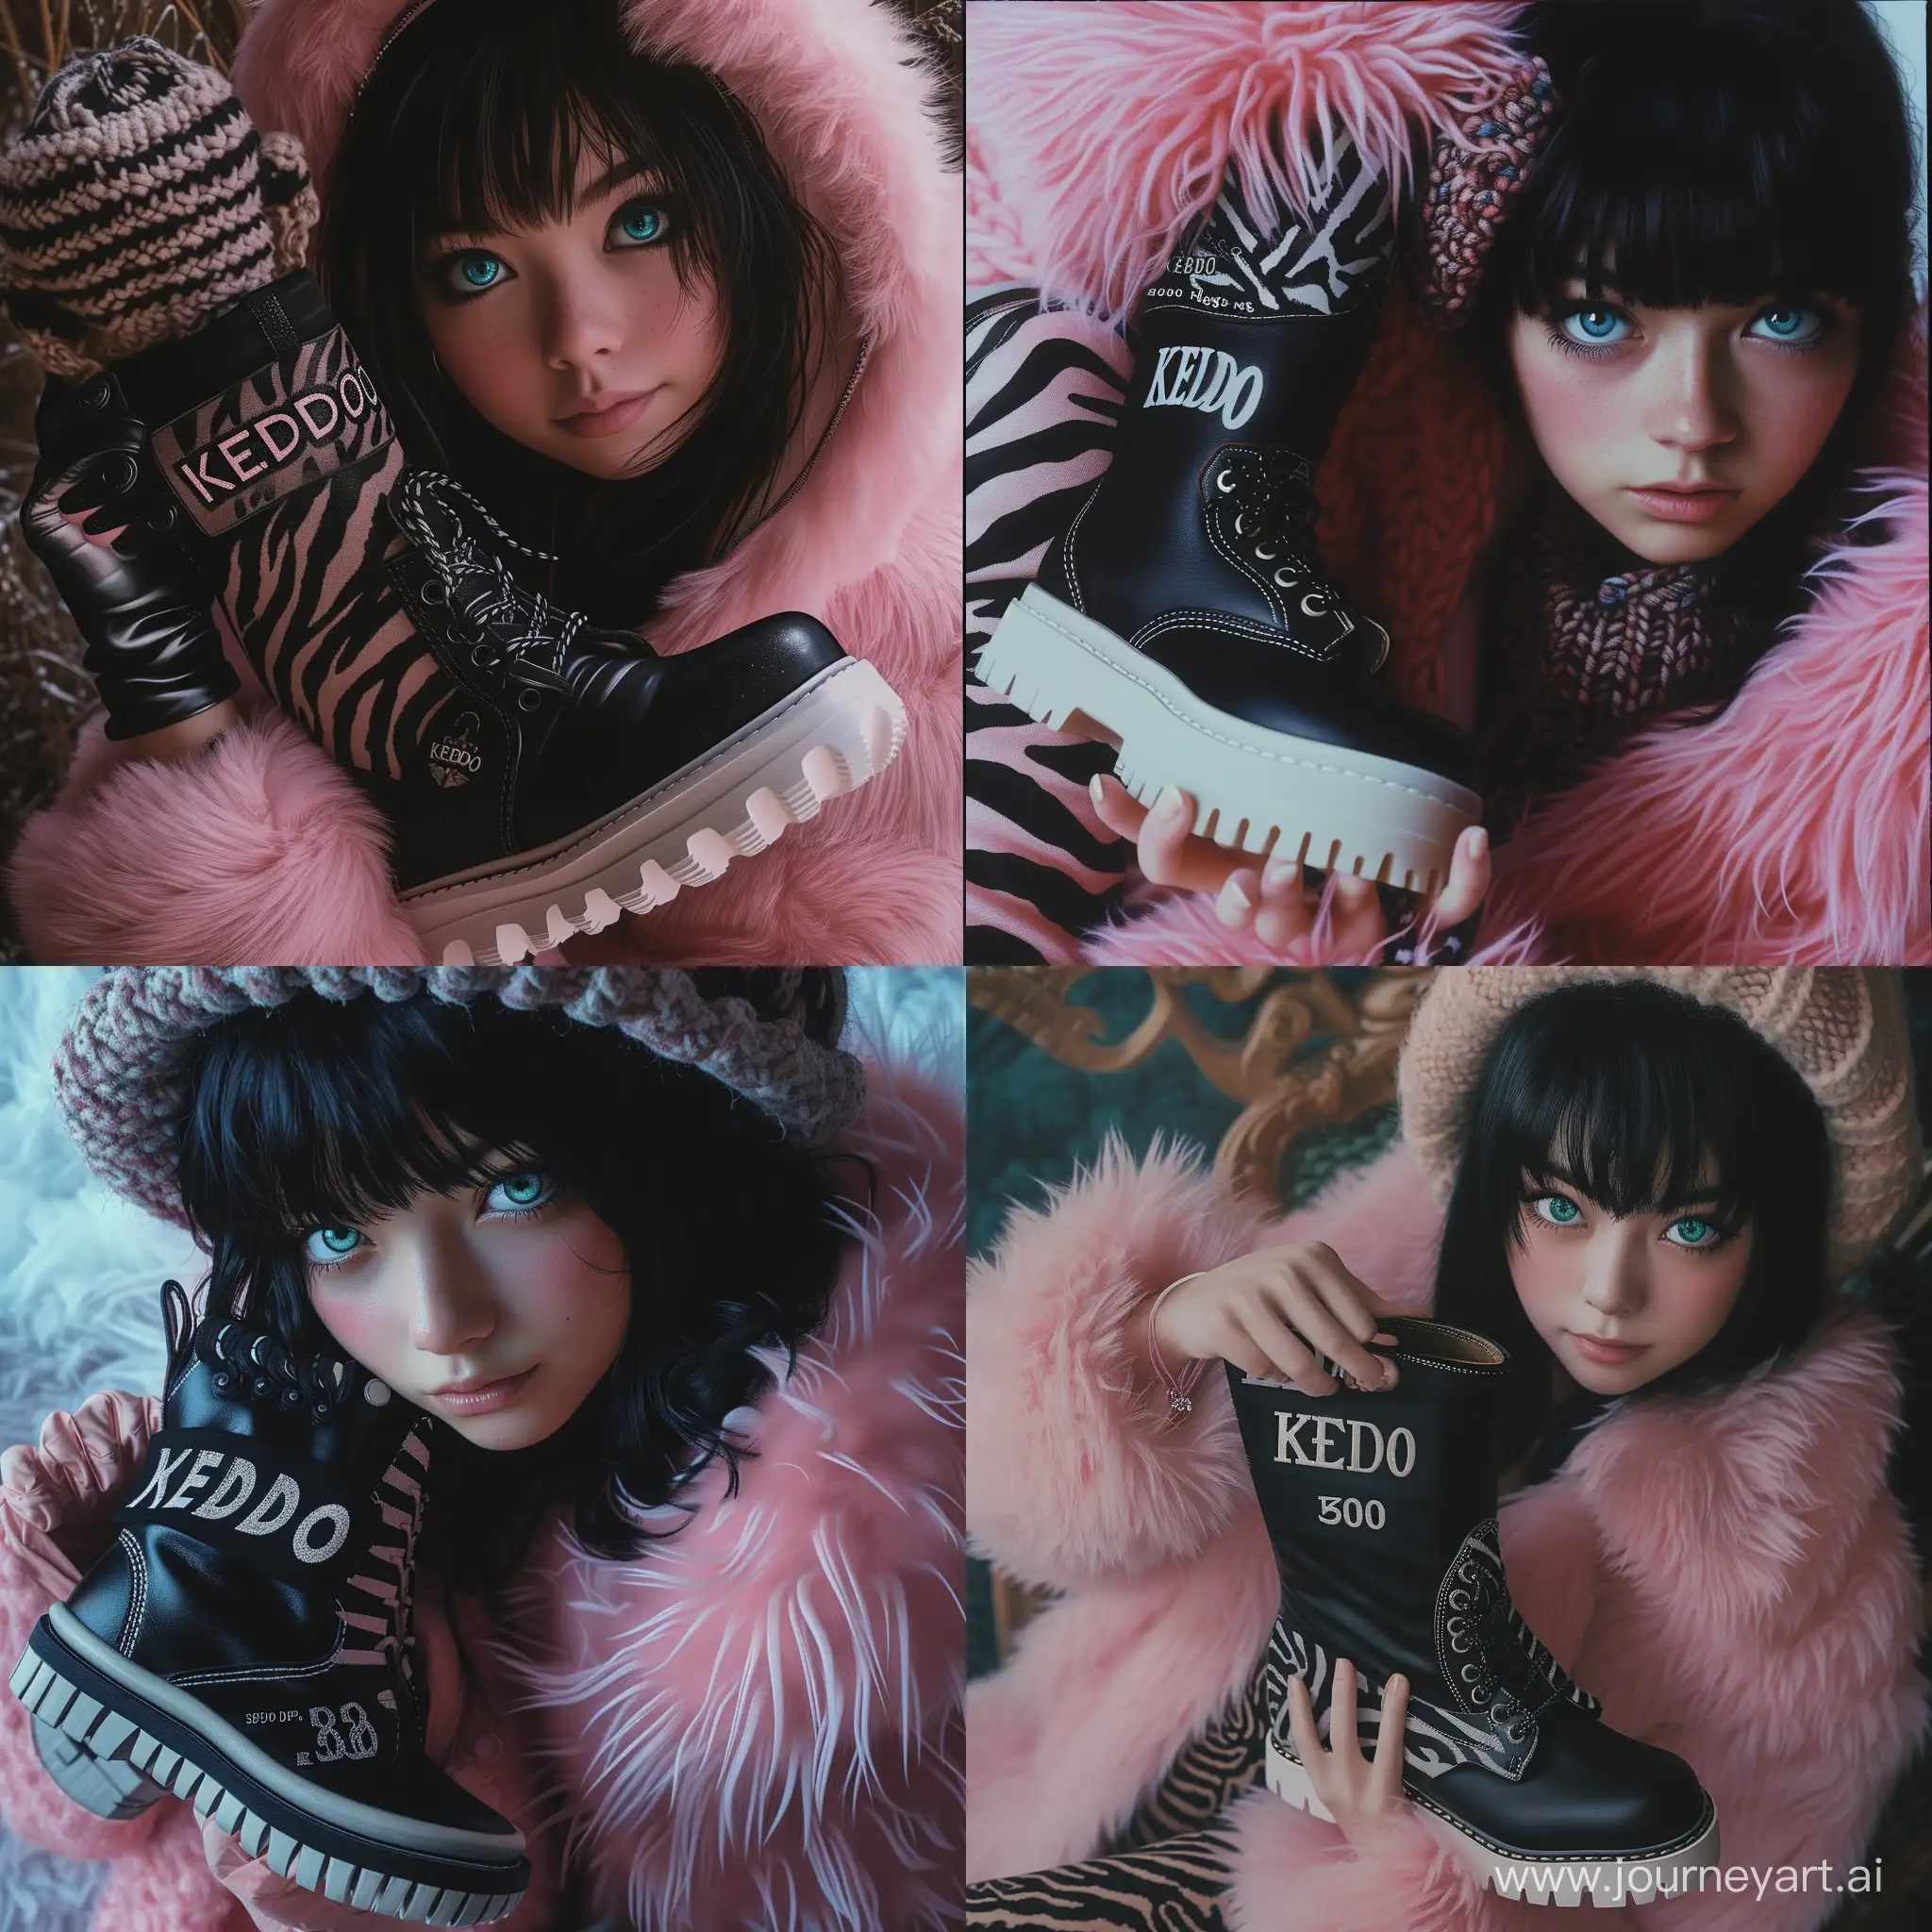 portrait of a girl with boots in hand, KEDDO inscription on the boots, KEDDO logo, black hair, professional photo, realistic, emerald blue eyes, black boot with white sole, zebra print, in a pink fur coat, in a knitted hat, 300dpi, realistic, f /19, soft light